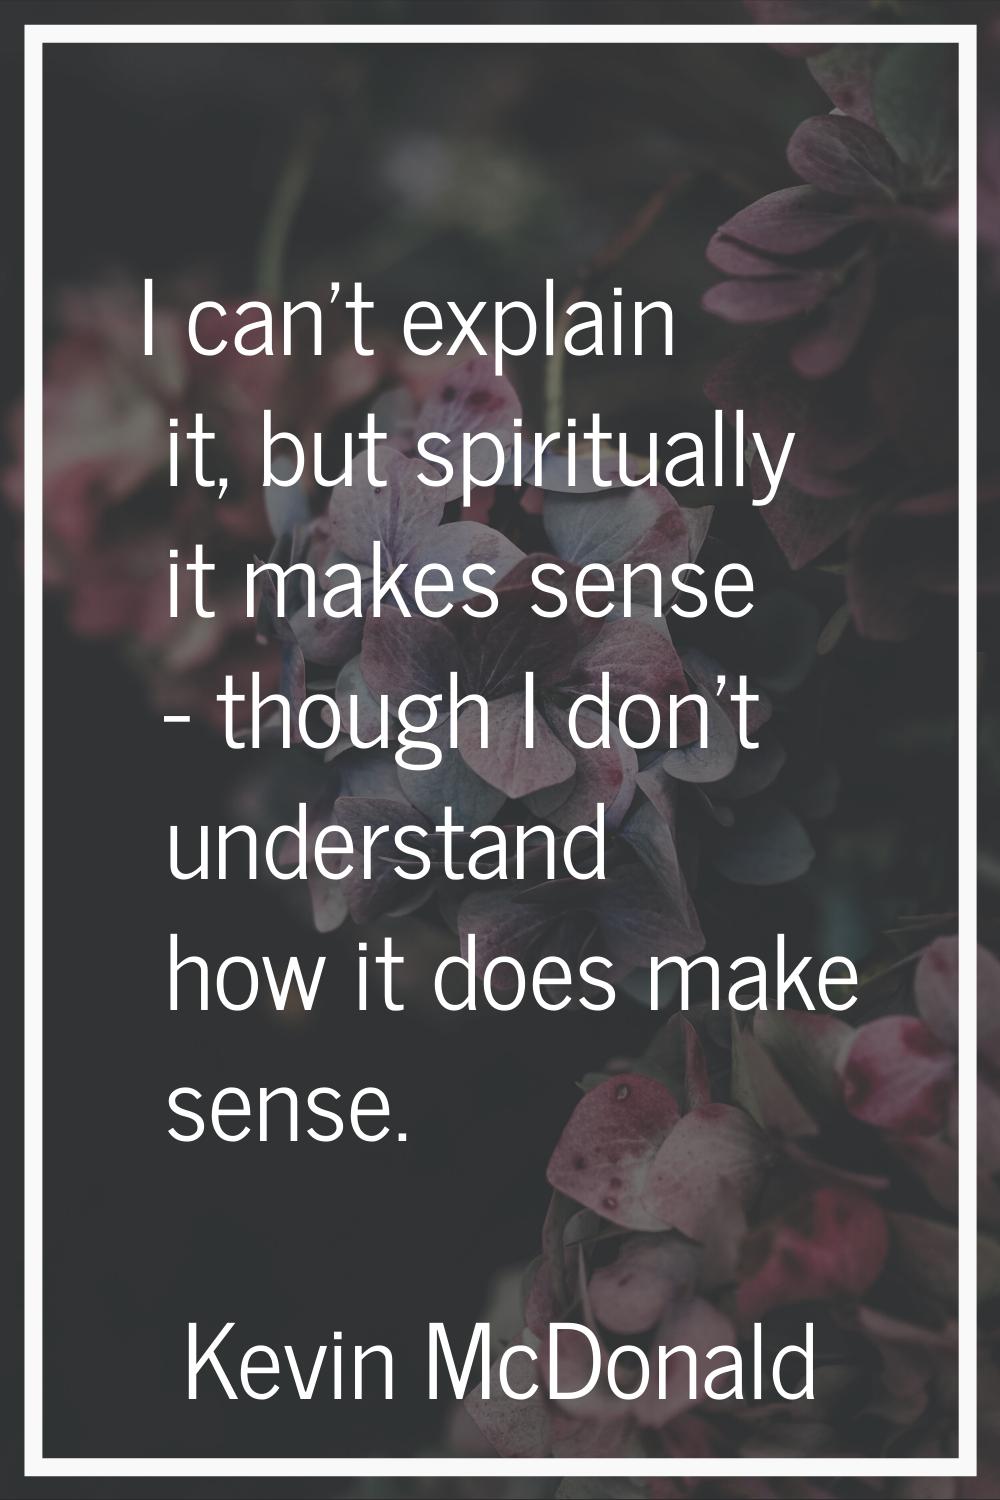 I can't explain it, but spiritually it makes sense - though I don't understand how it does make sen